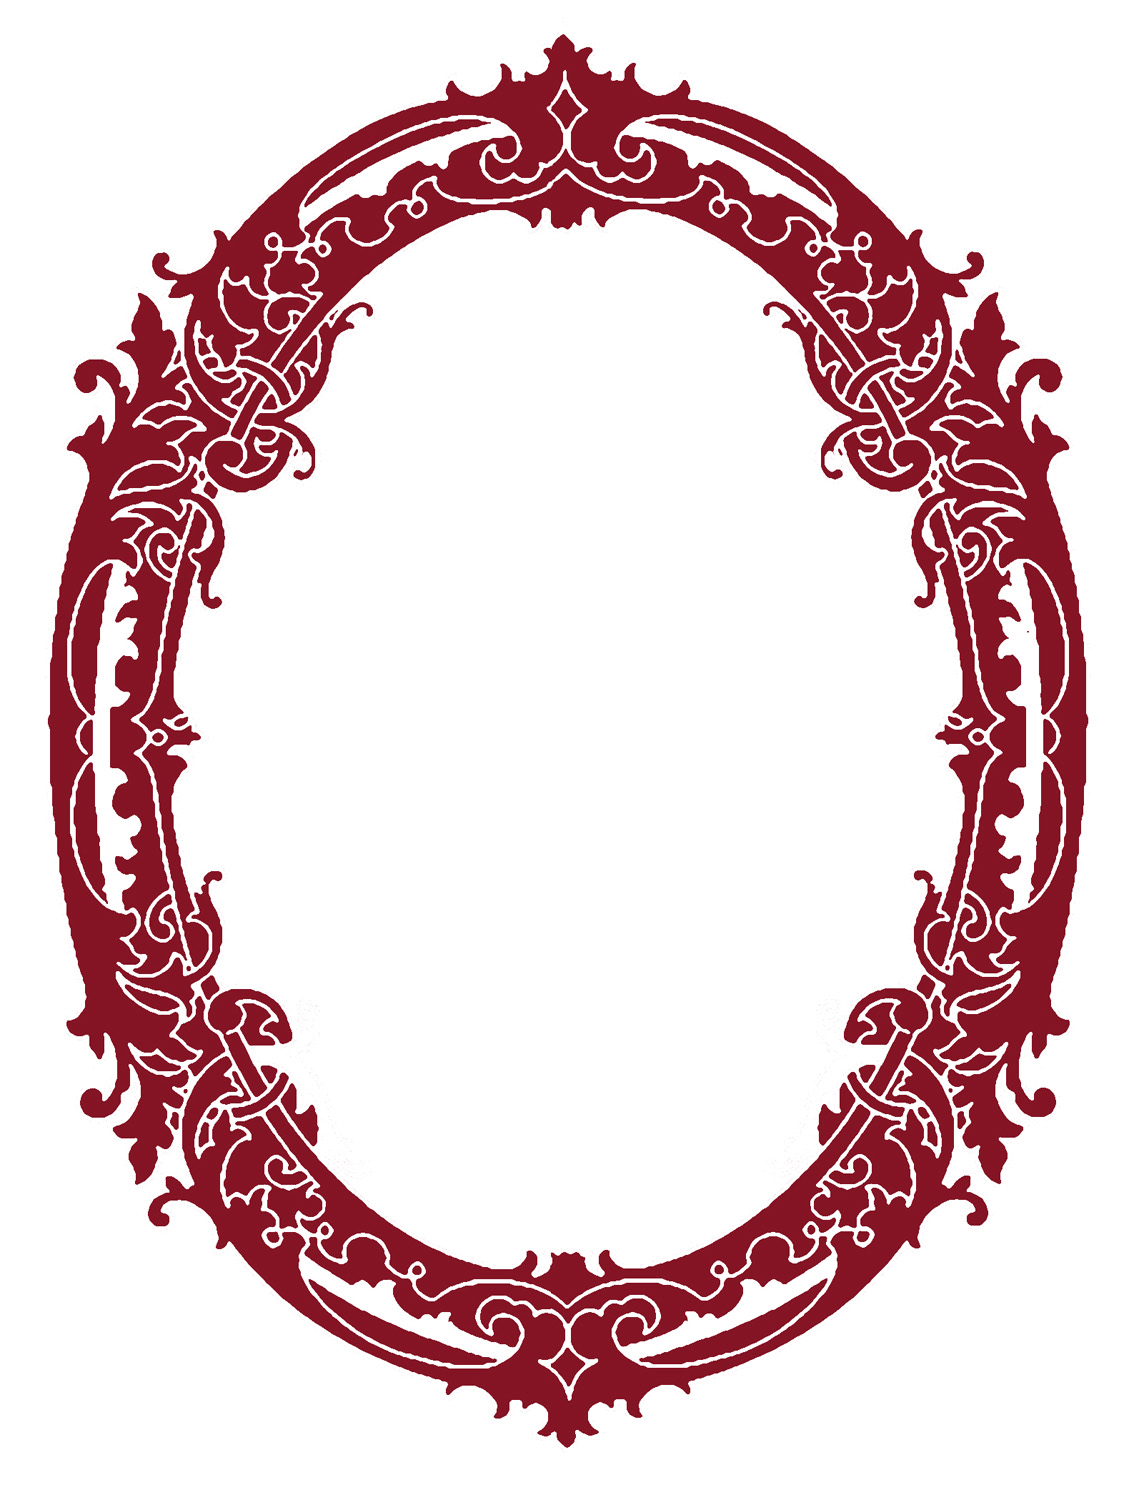 oval%2Bframe%2Bswirly%2Bvintage%2Bgraphicsfairy%2Bred